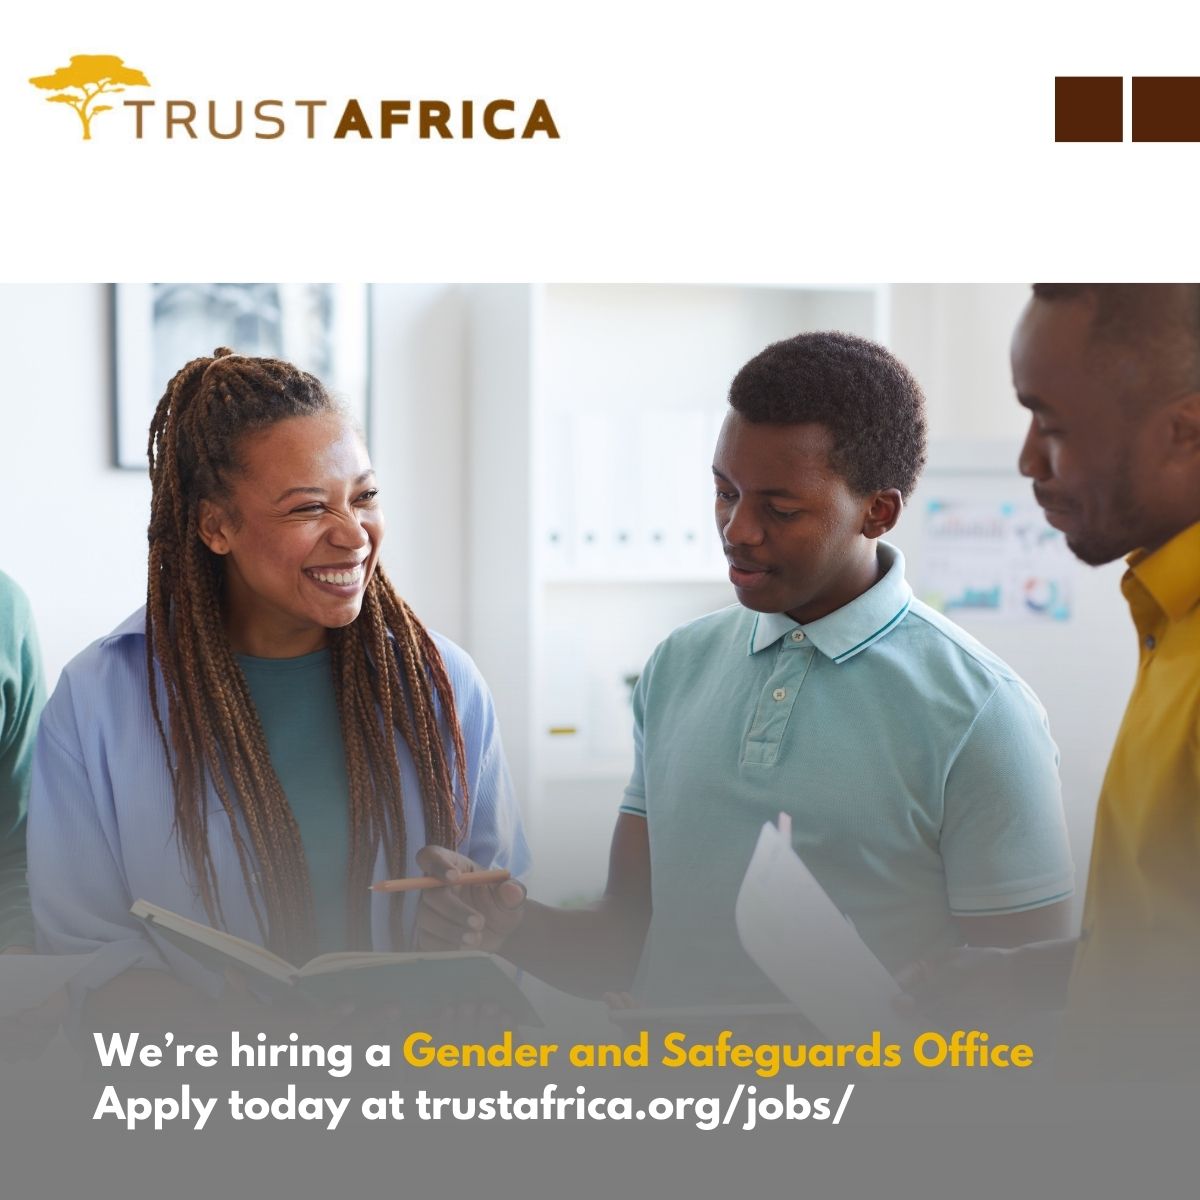 trustafrica.bamboohr.com/careers/20 Gender and Safeguards Officer Dakar, Dakar Location: Dakar, Senegal Application Deadline: 01-March-2024 Programmatic Focus: Democracy and Governance participation Type of Contract: Individual Contract Languages Required: English or French